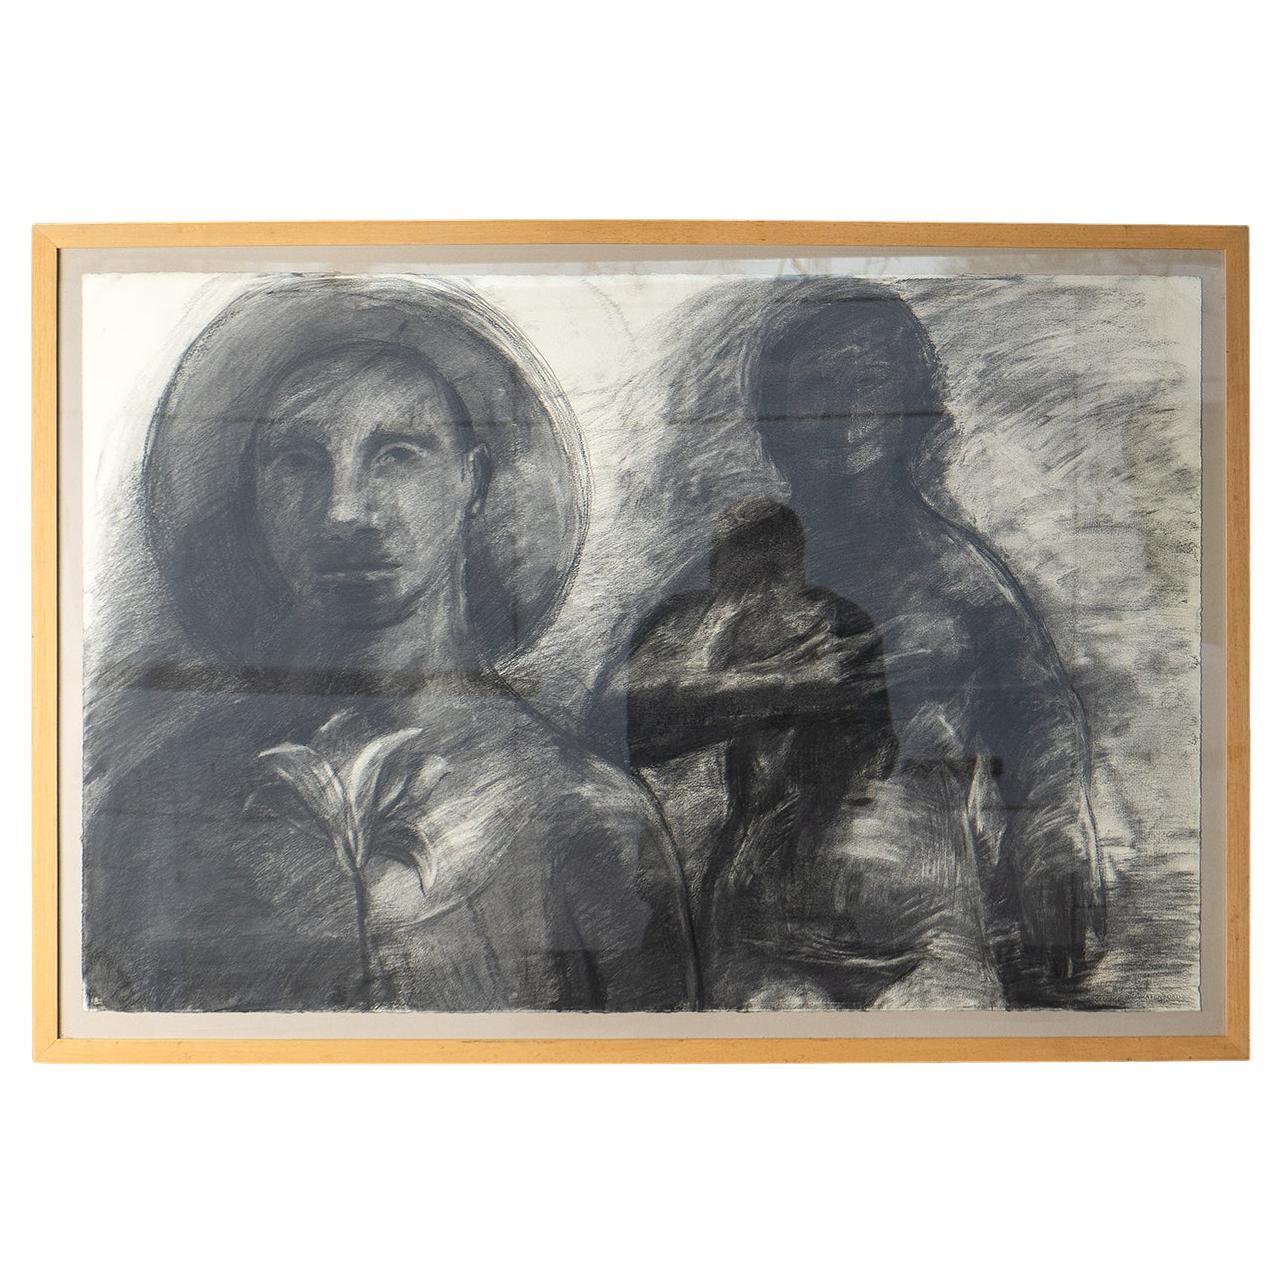 Large Vintage Original Monochrome Charcoal Drawing of Two Figures